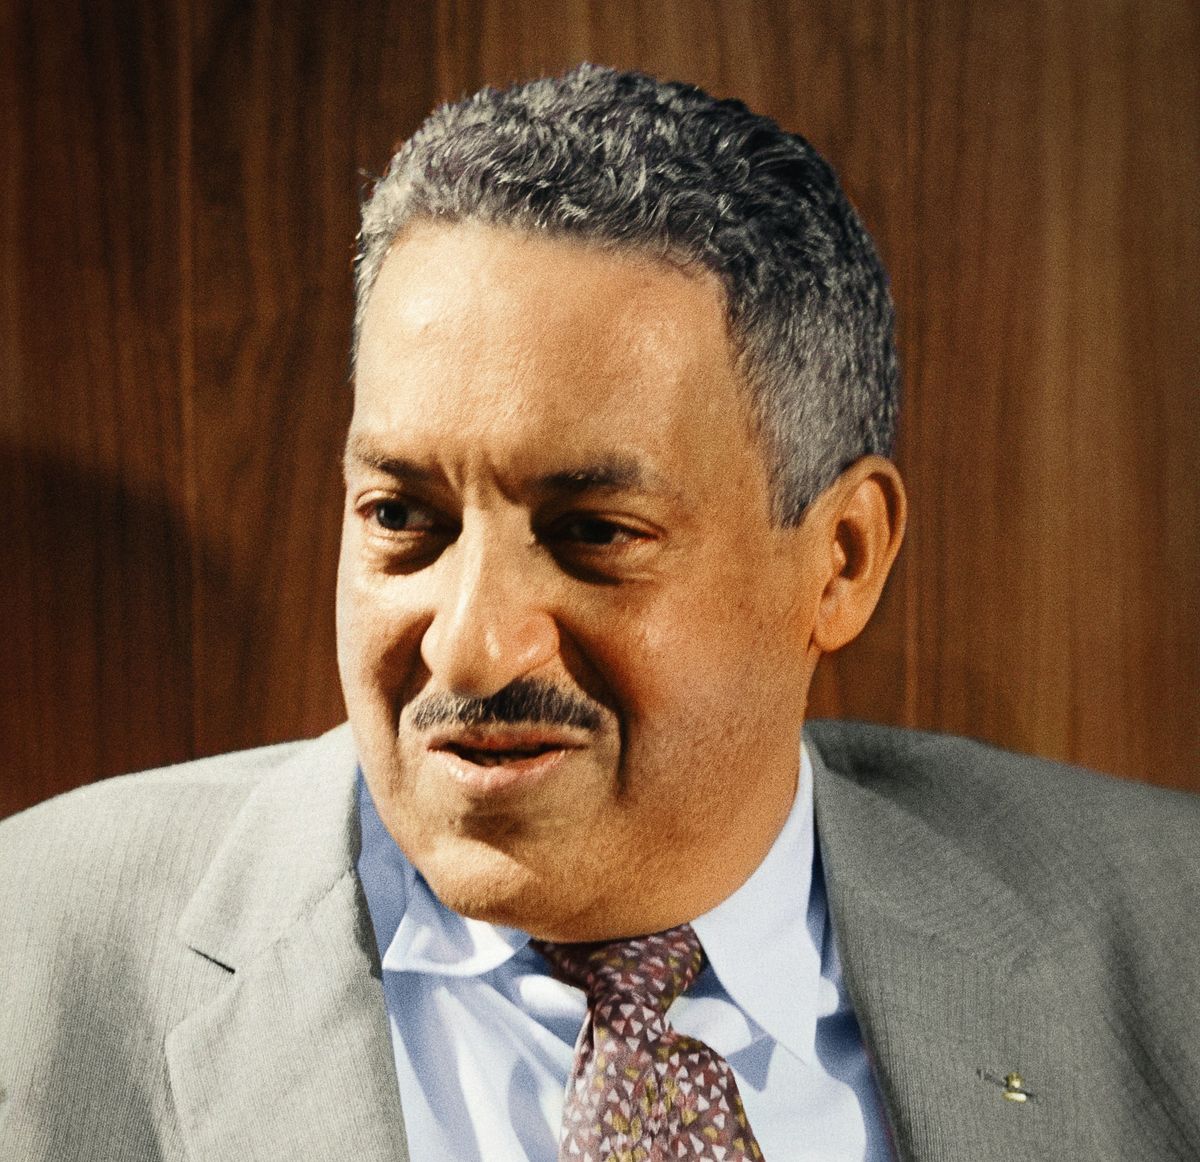 Thurgood Marshall: A Beacon of Civil Rights and His Defining Supreme Court Moments